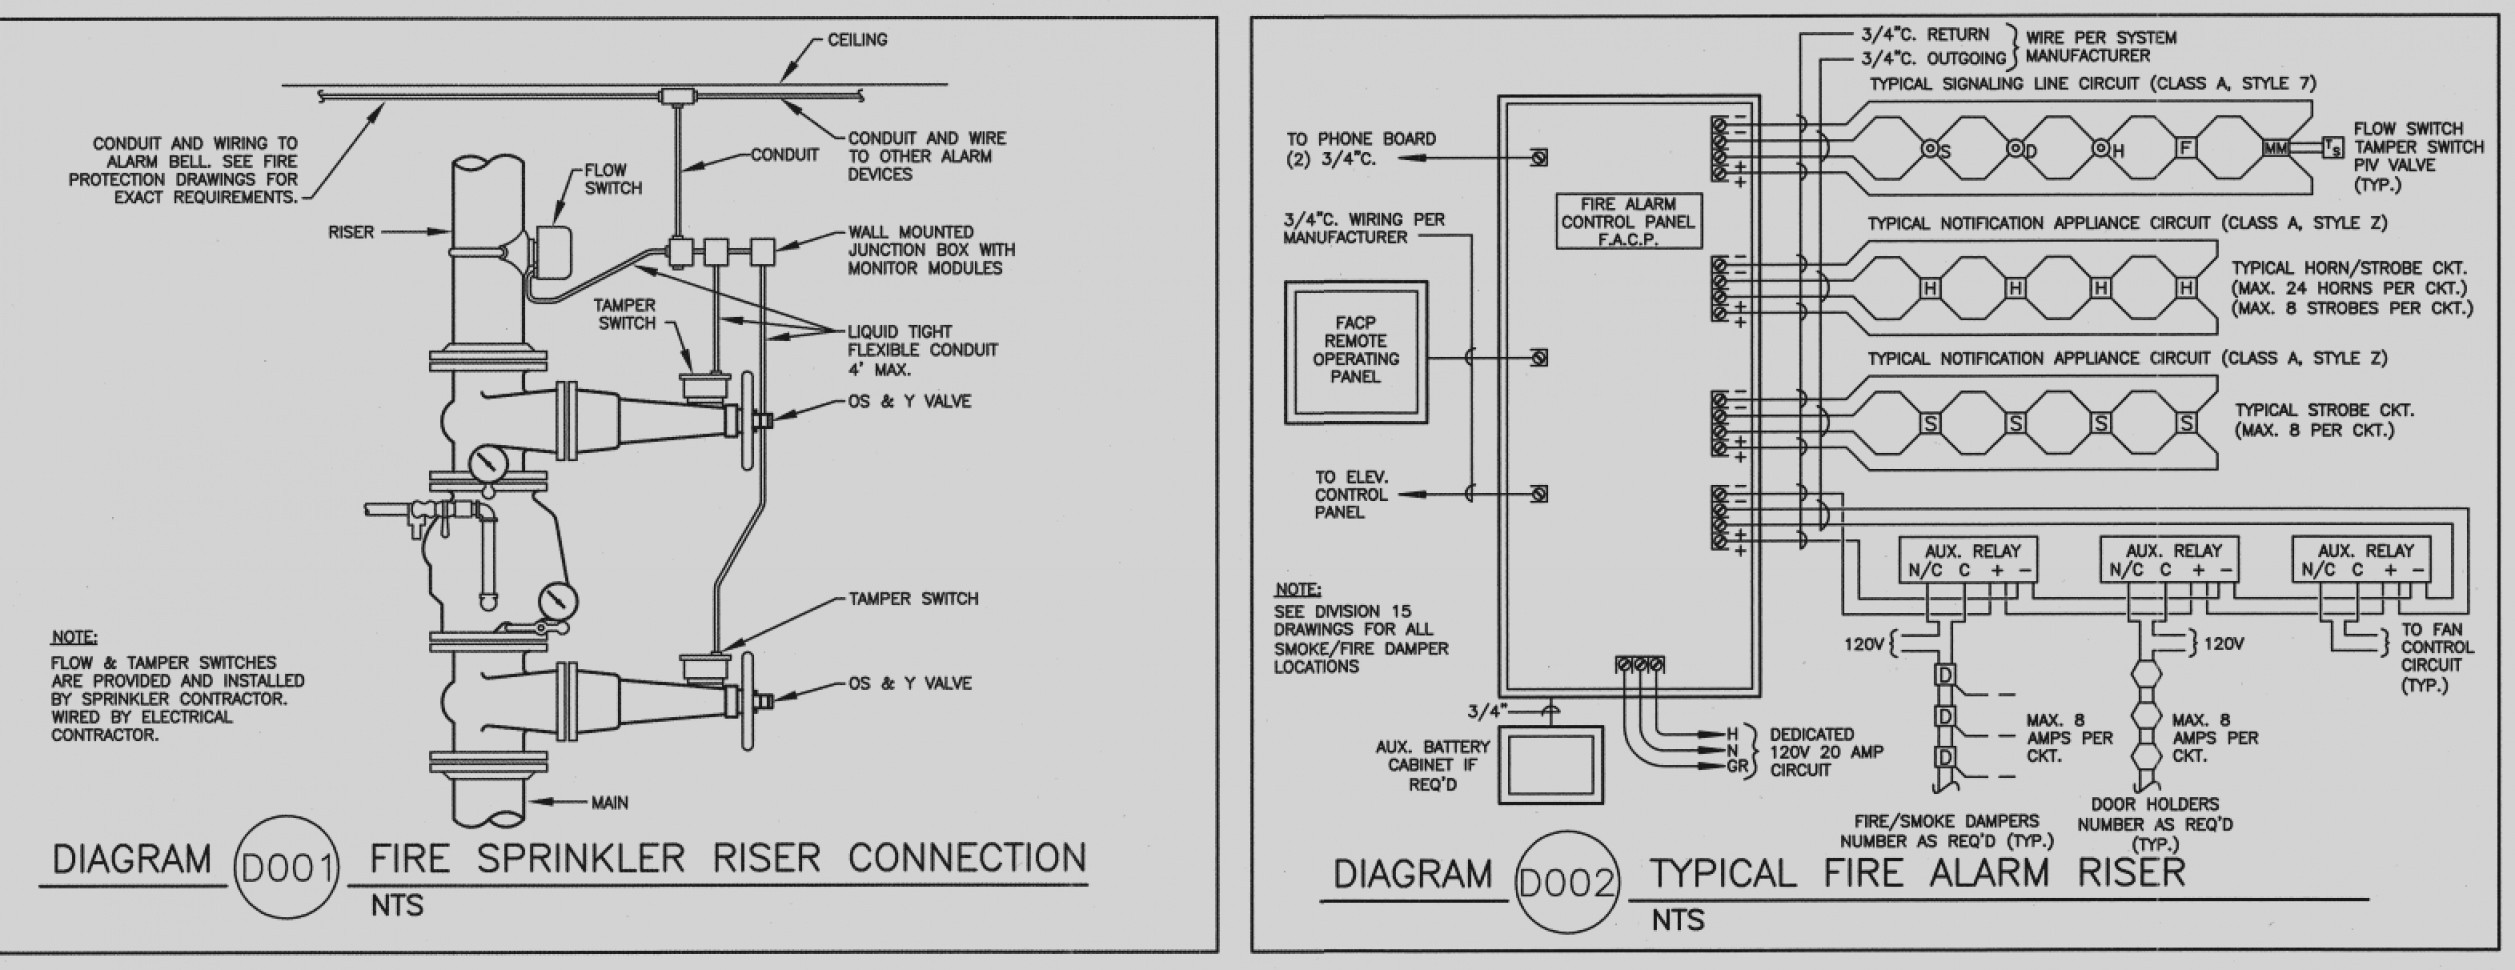 Fire Alarm Wiring Diagram Perfect Inspirational Dsc 4 Wire Smoke Alarm Wiring Diagram with Relay